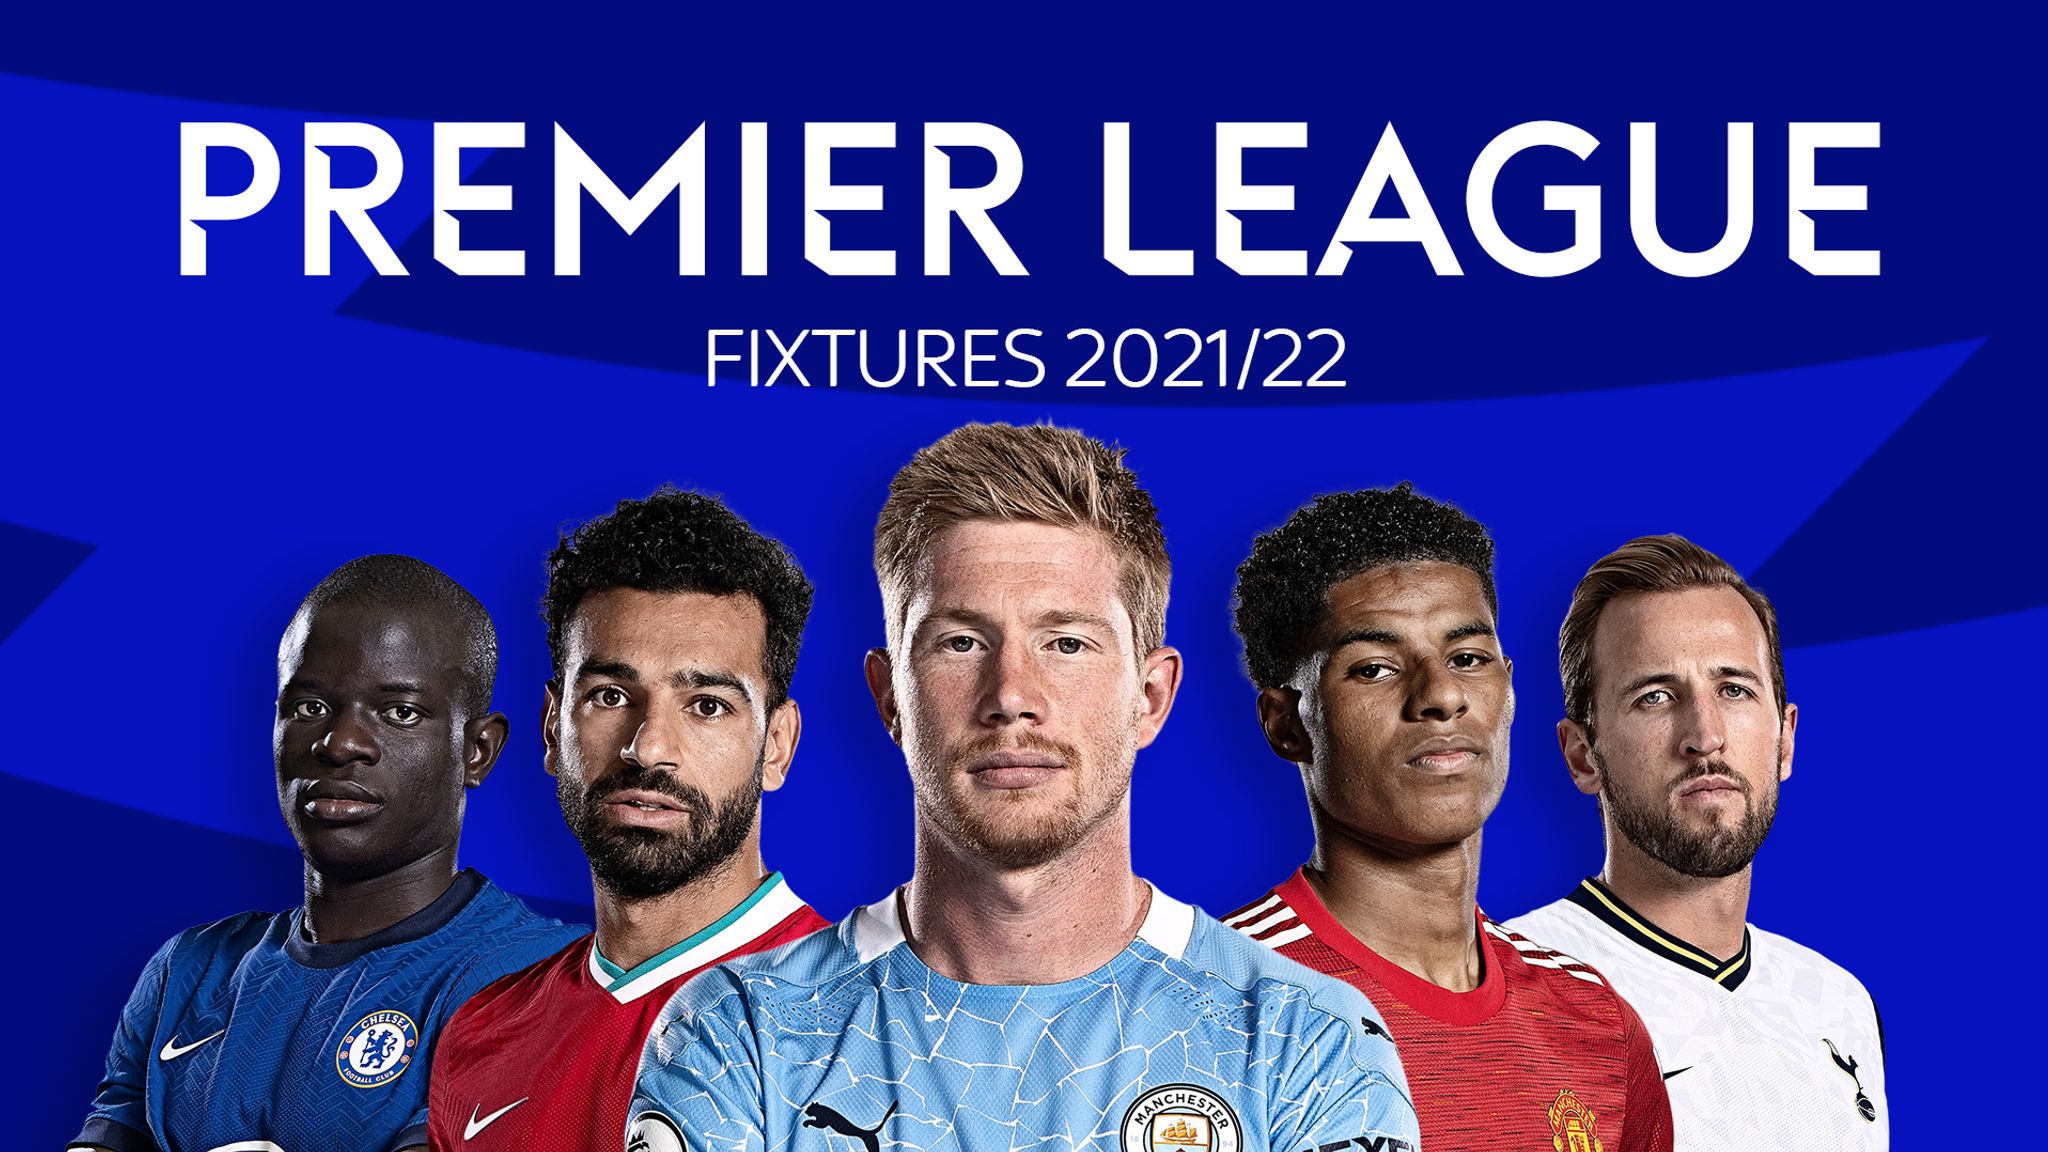 Premier League 2021 22 Fixtures And Schedule: Man City Title Defence Begins At Tottenham, Man Utd Host Leeds, Liverpool Visit Norwich On Opening Weekend